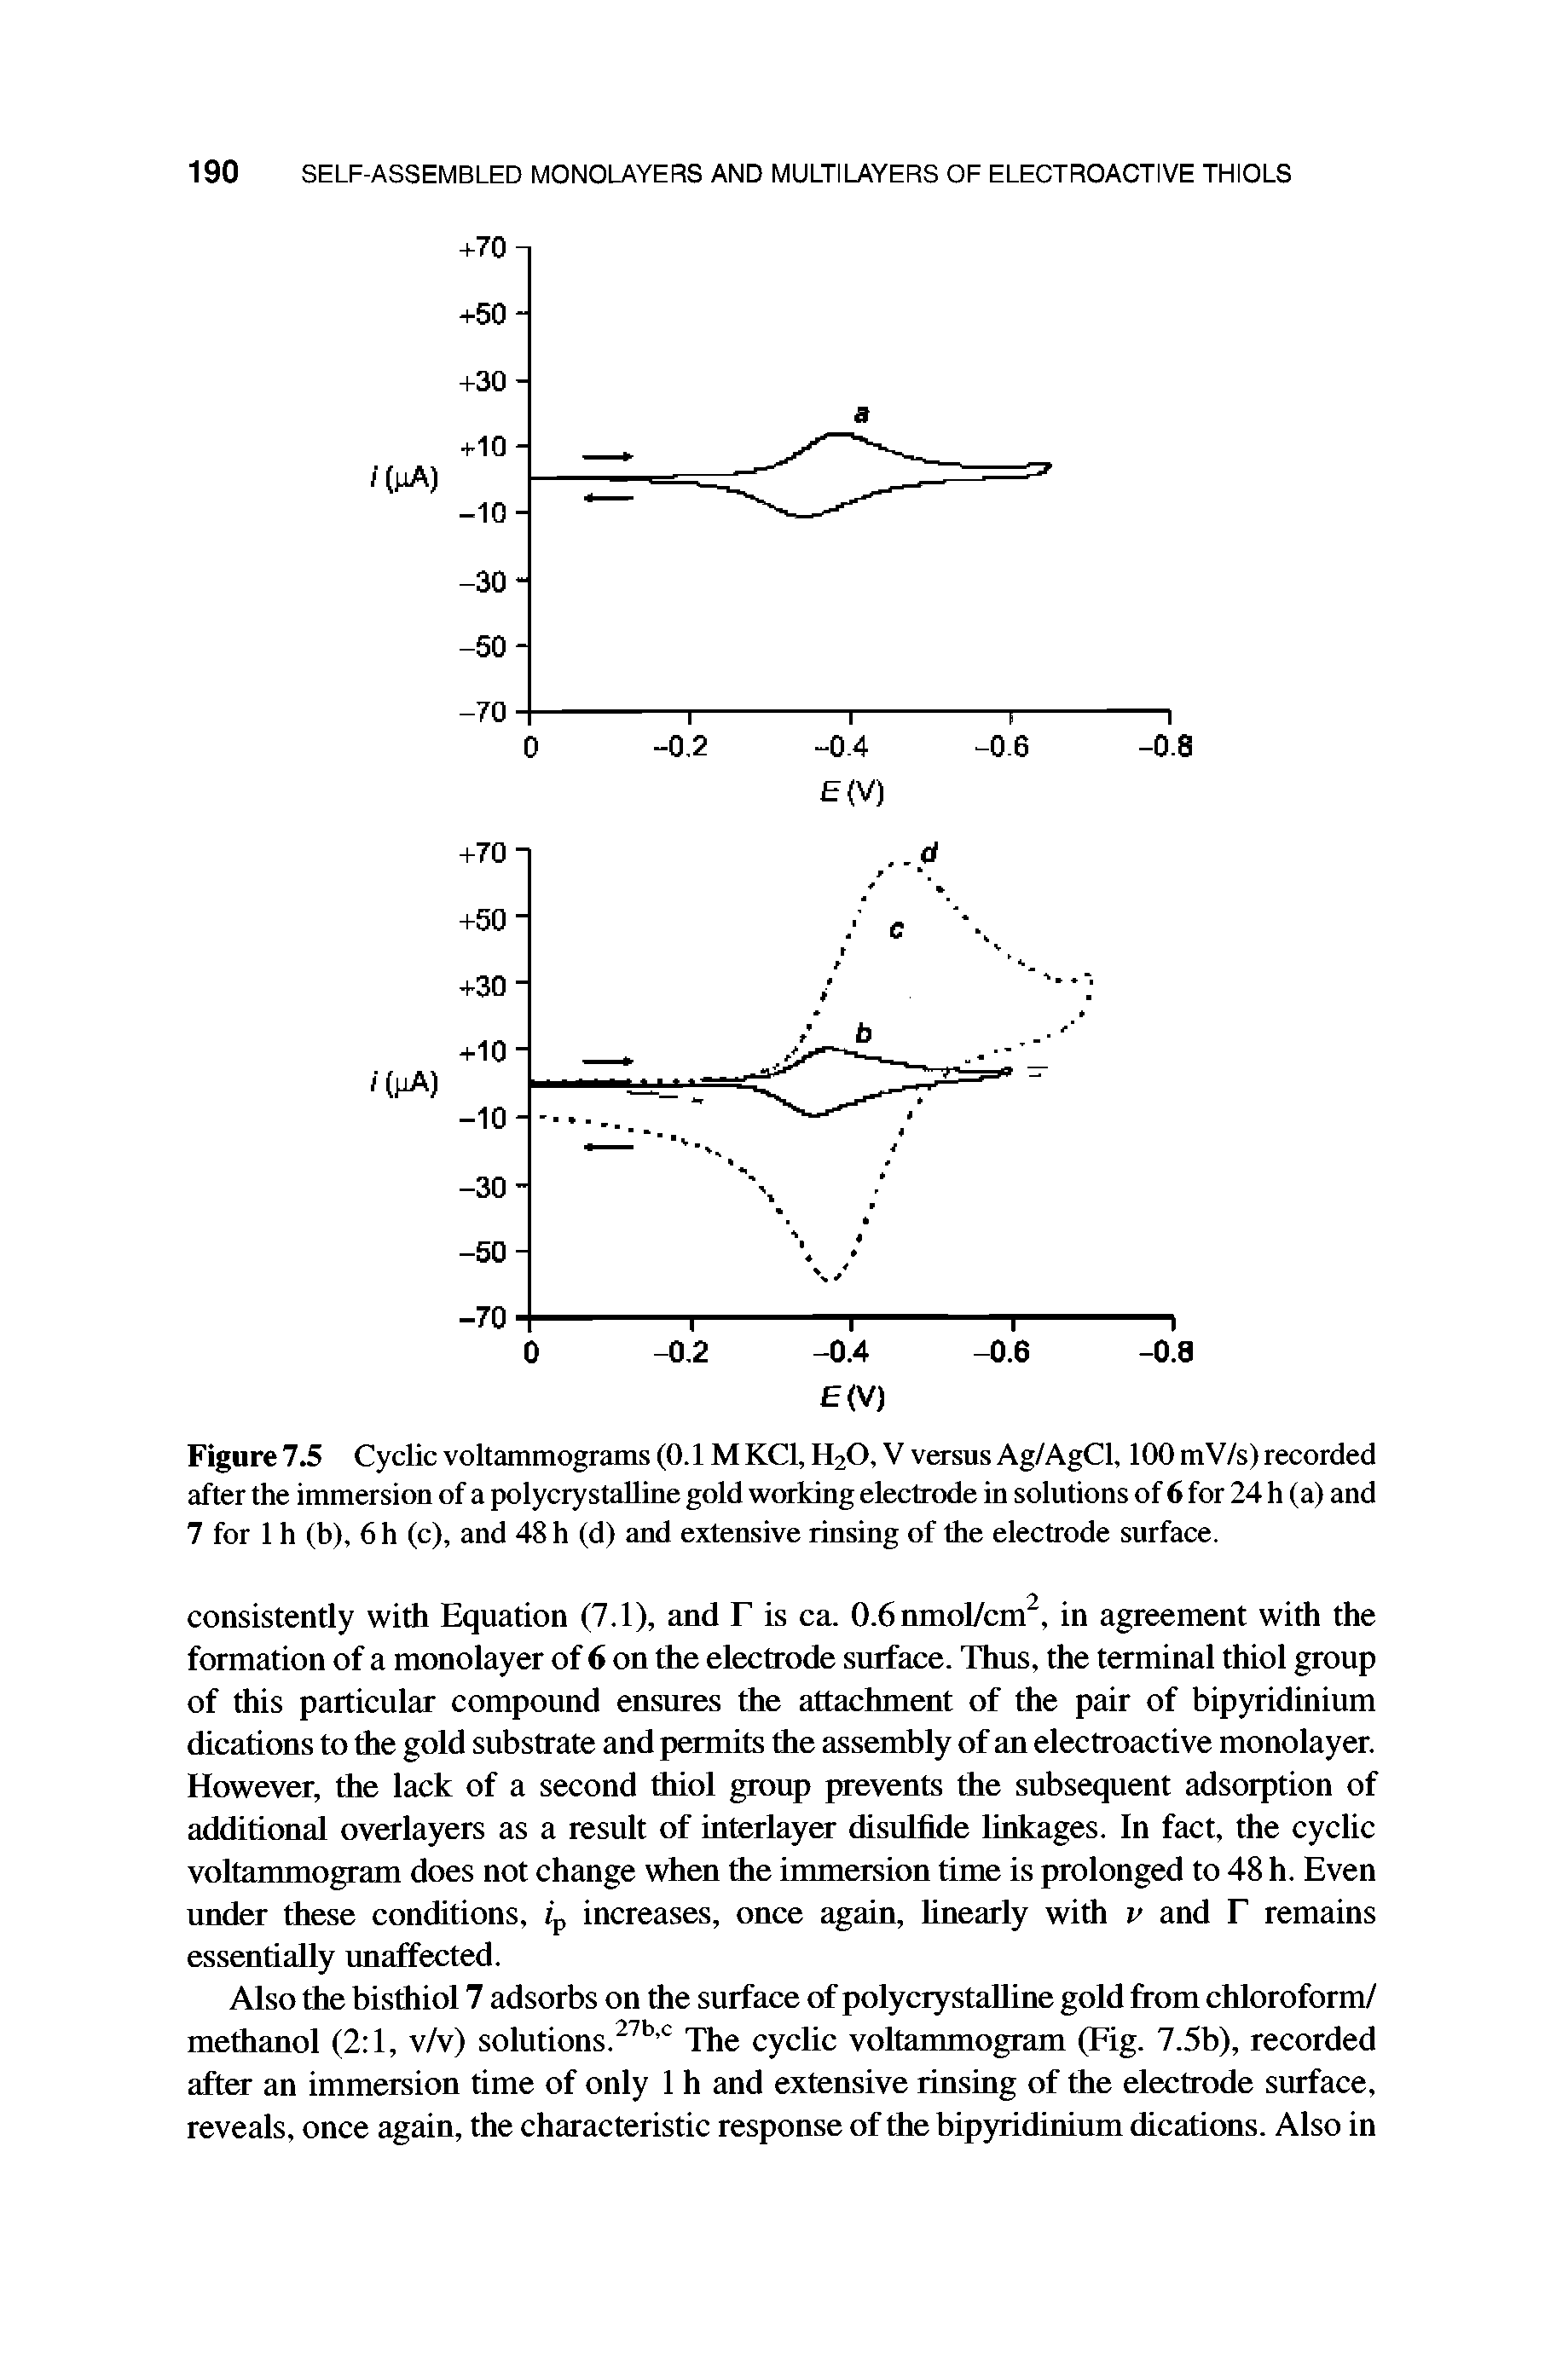 Figure 7.5 Cyclic voltammograms (0.1 M KC1, H20, V versus Ag/AgCl, 100 mV/s) recorded after the immersion of a polycrystalline gold working electrode in solutions of 6 for 24 h (a) and 7 for 1 h (b), 6 h (c), and 48 h (d) and extensive rinsing of the electrode surface.